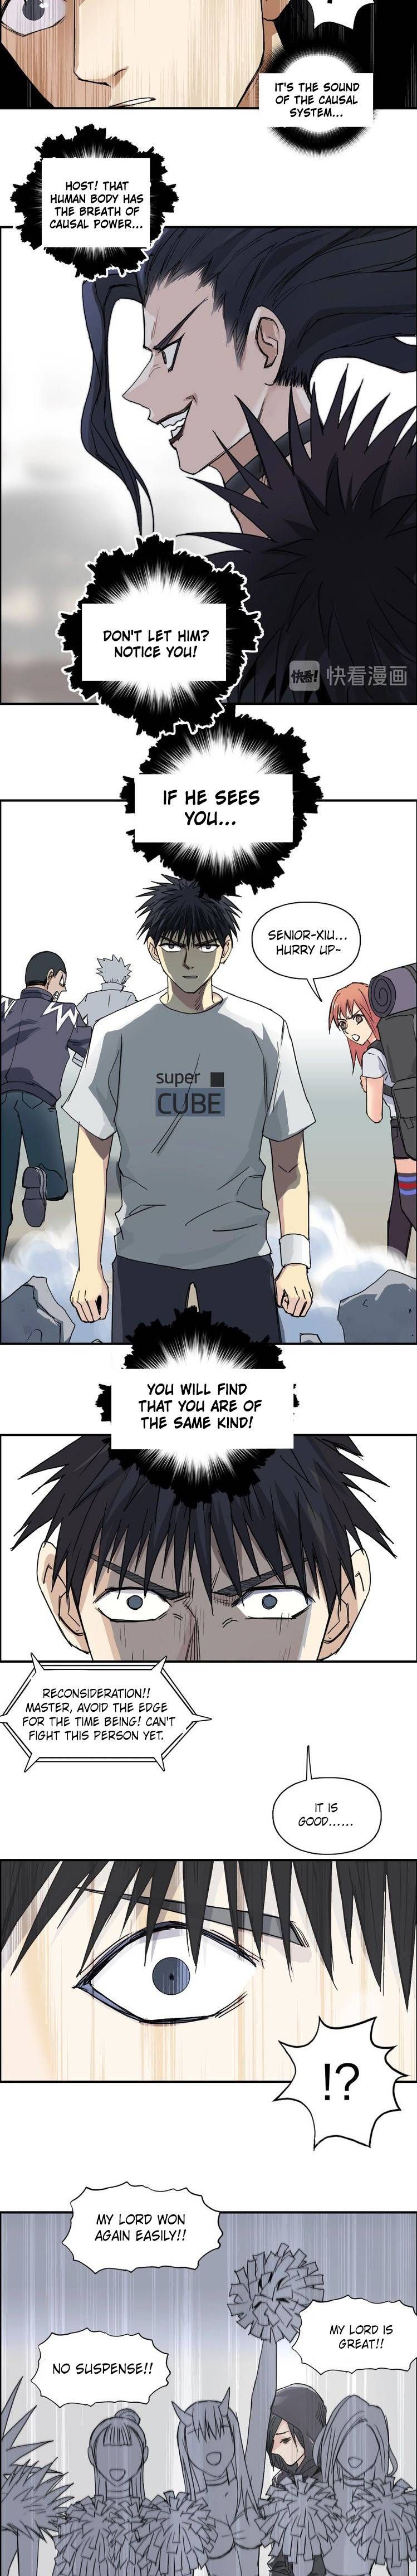 Super Cube Chapter 177 page 12